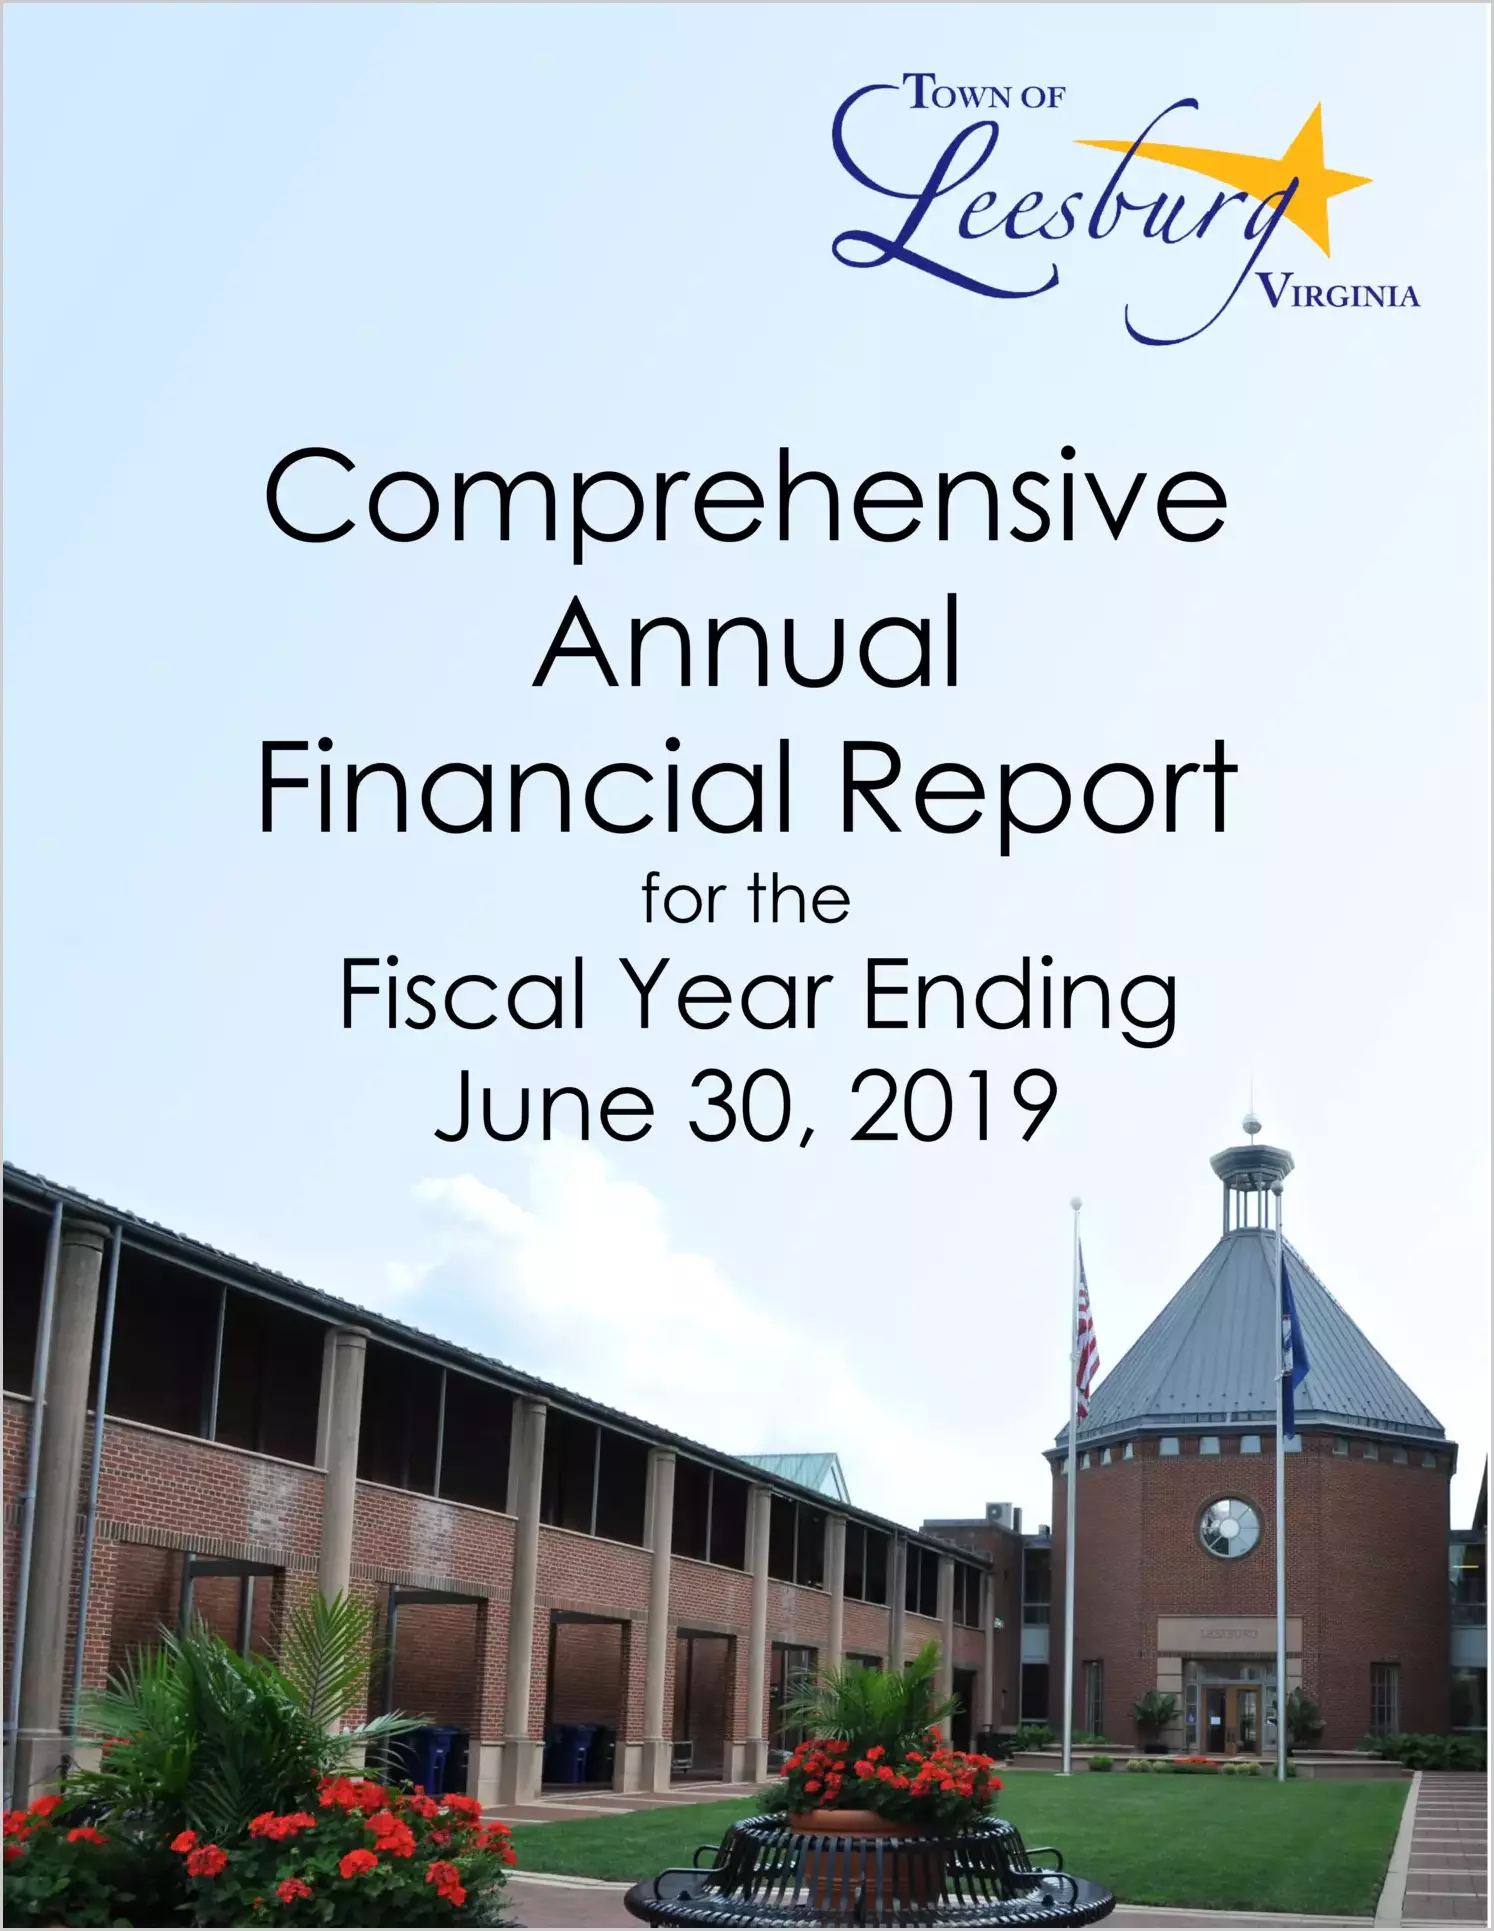 2019 Annual Financial Report for Town of Leesburg